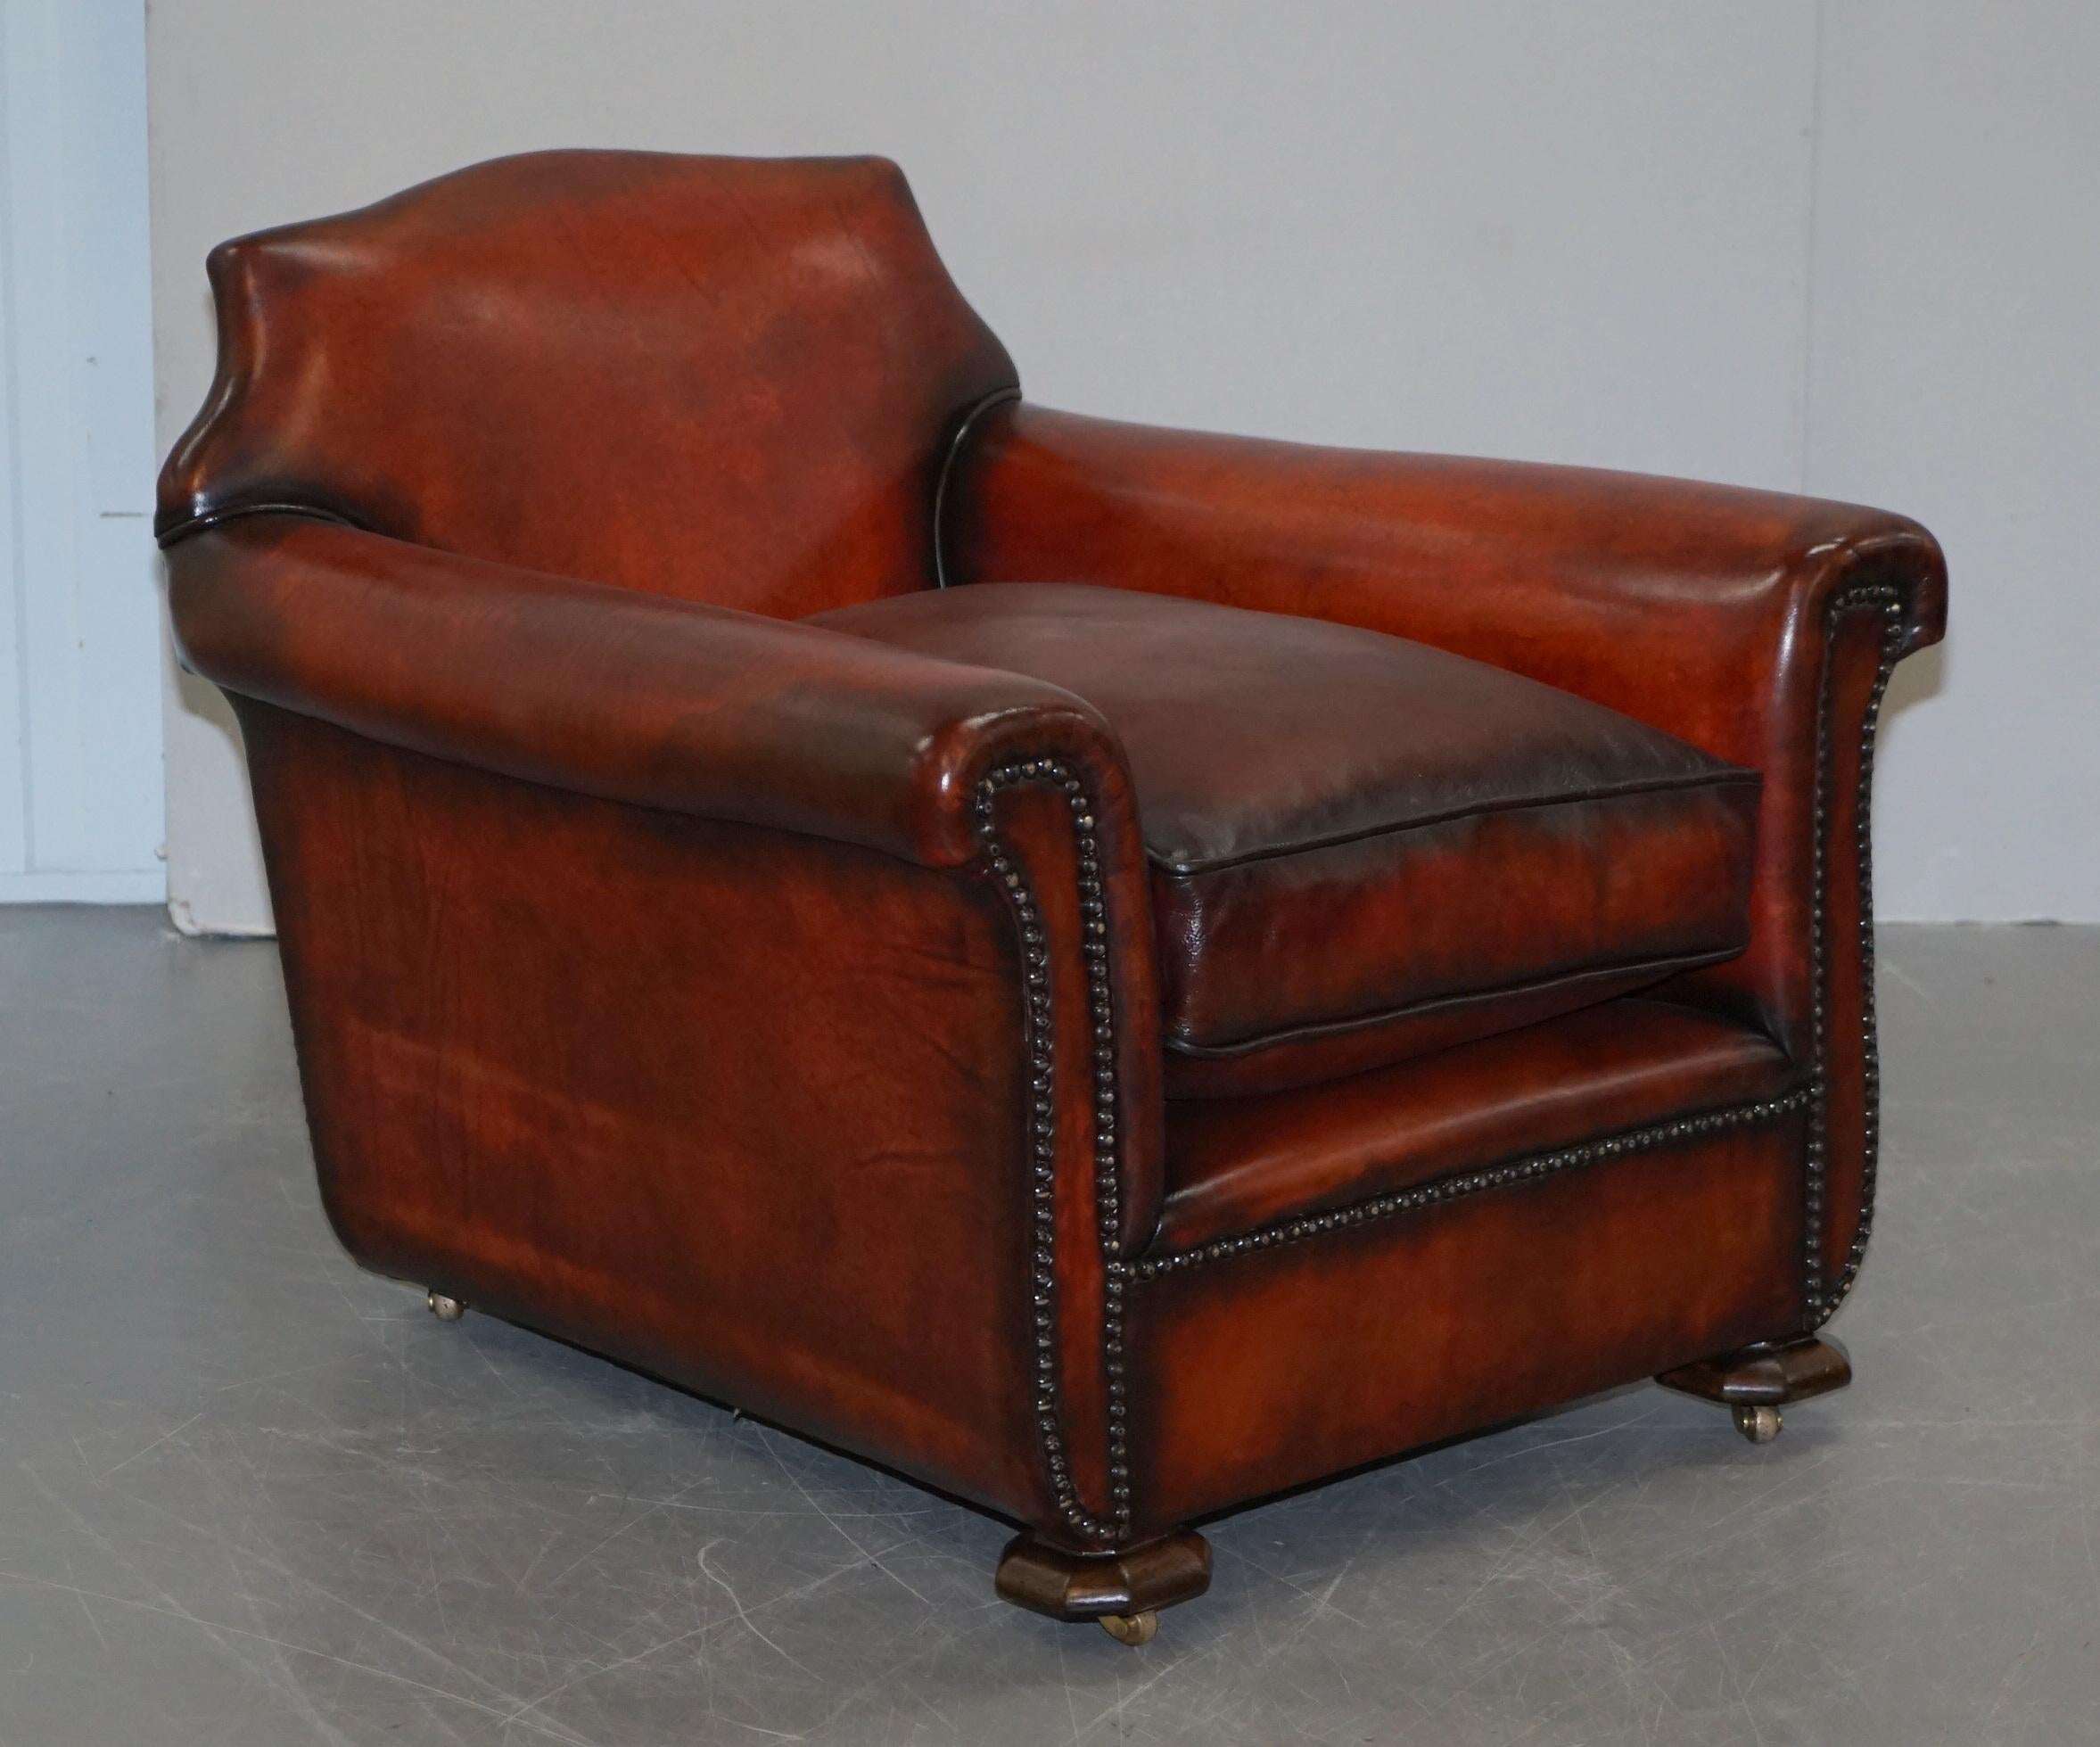 We are delighted to offer for sale this stunning fully restored pair of Art Deco hand dyed rich Whisky brown leather club armchairs

A very good looking well made and comfortable pair of armchairs, the leather is thick saddle hide upholstery which